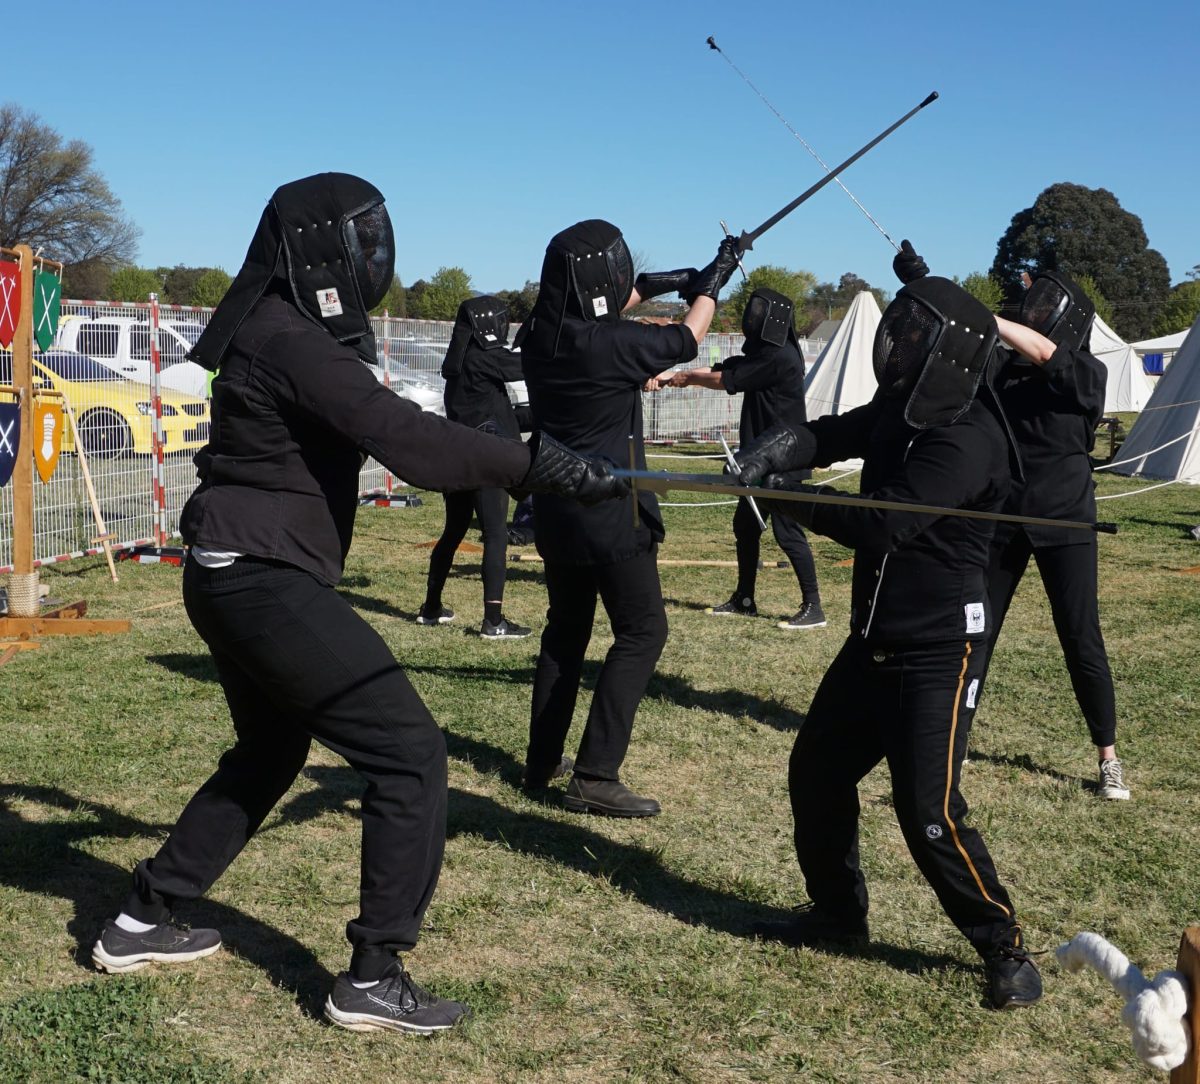 A group of people in black clothes and protective gear, fencing.